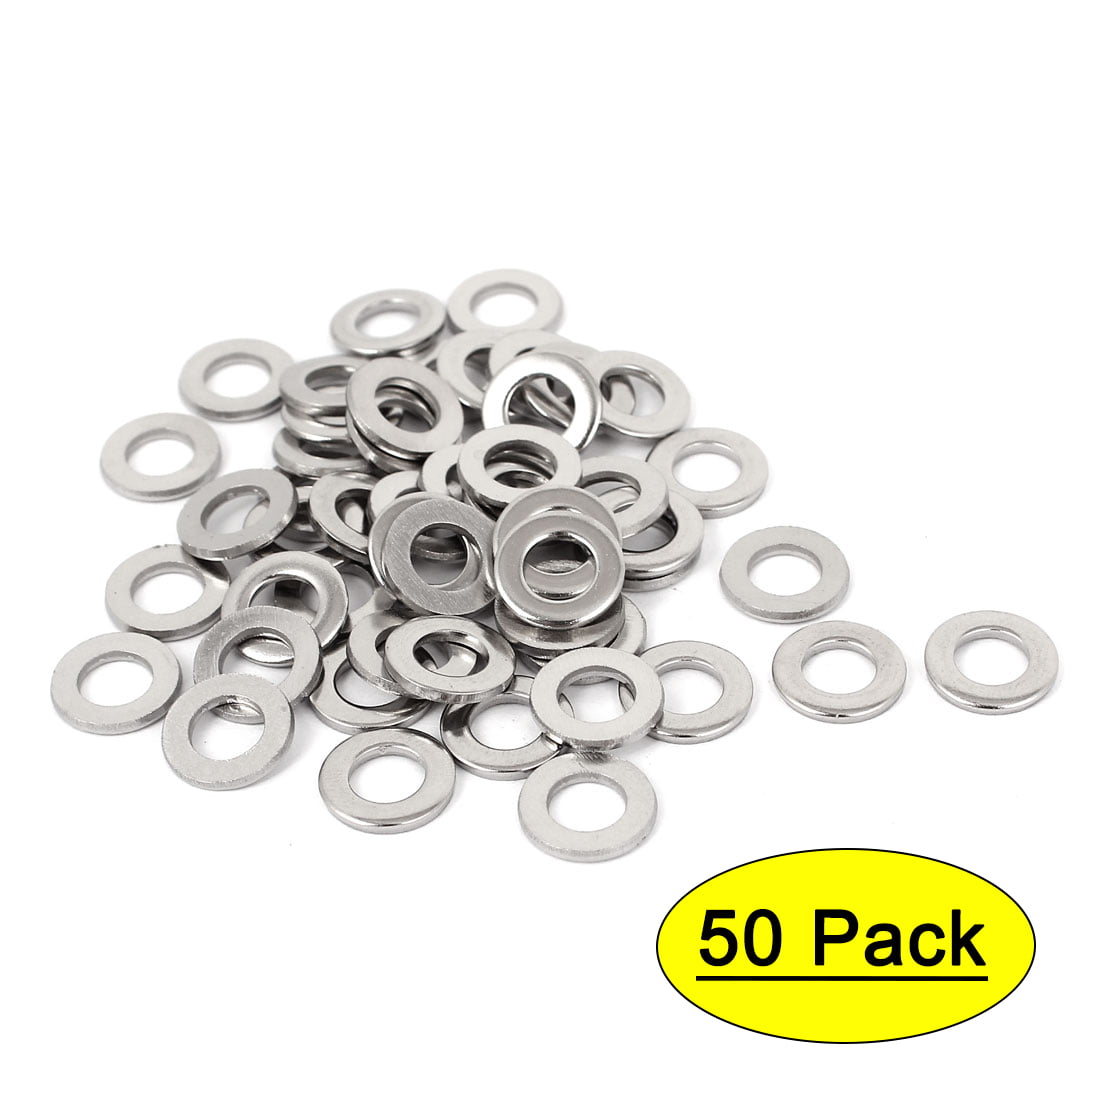 300 Pieces M5*10*1mm 316 Stainless Steel Flat Washer Marine Grade 